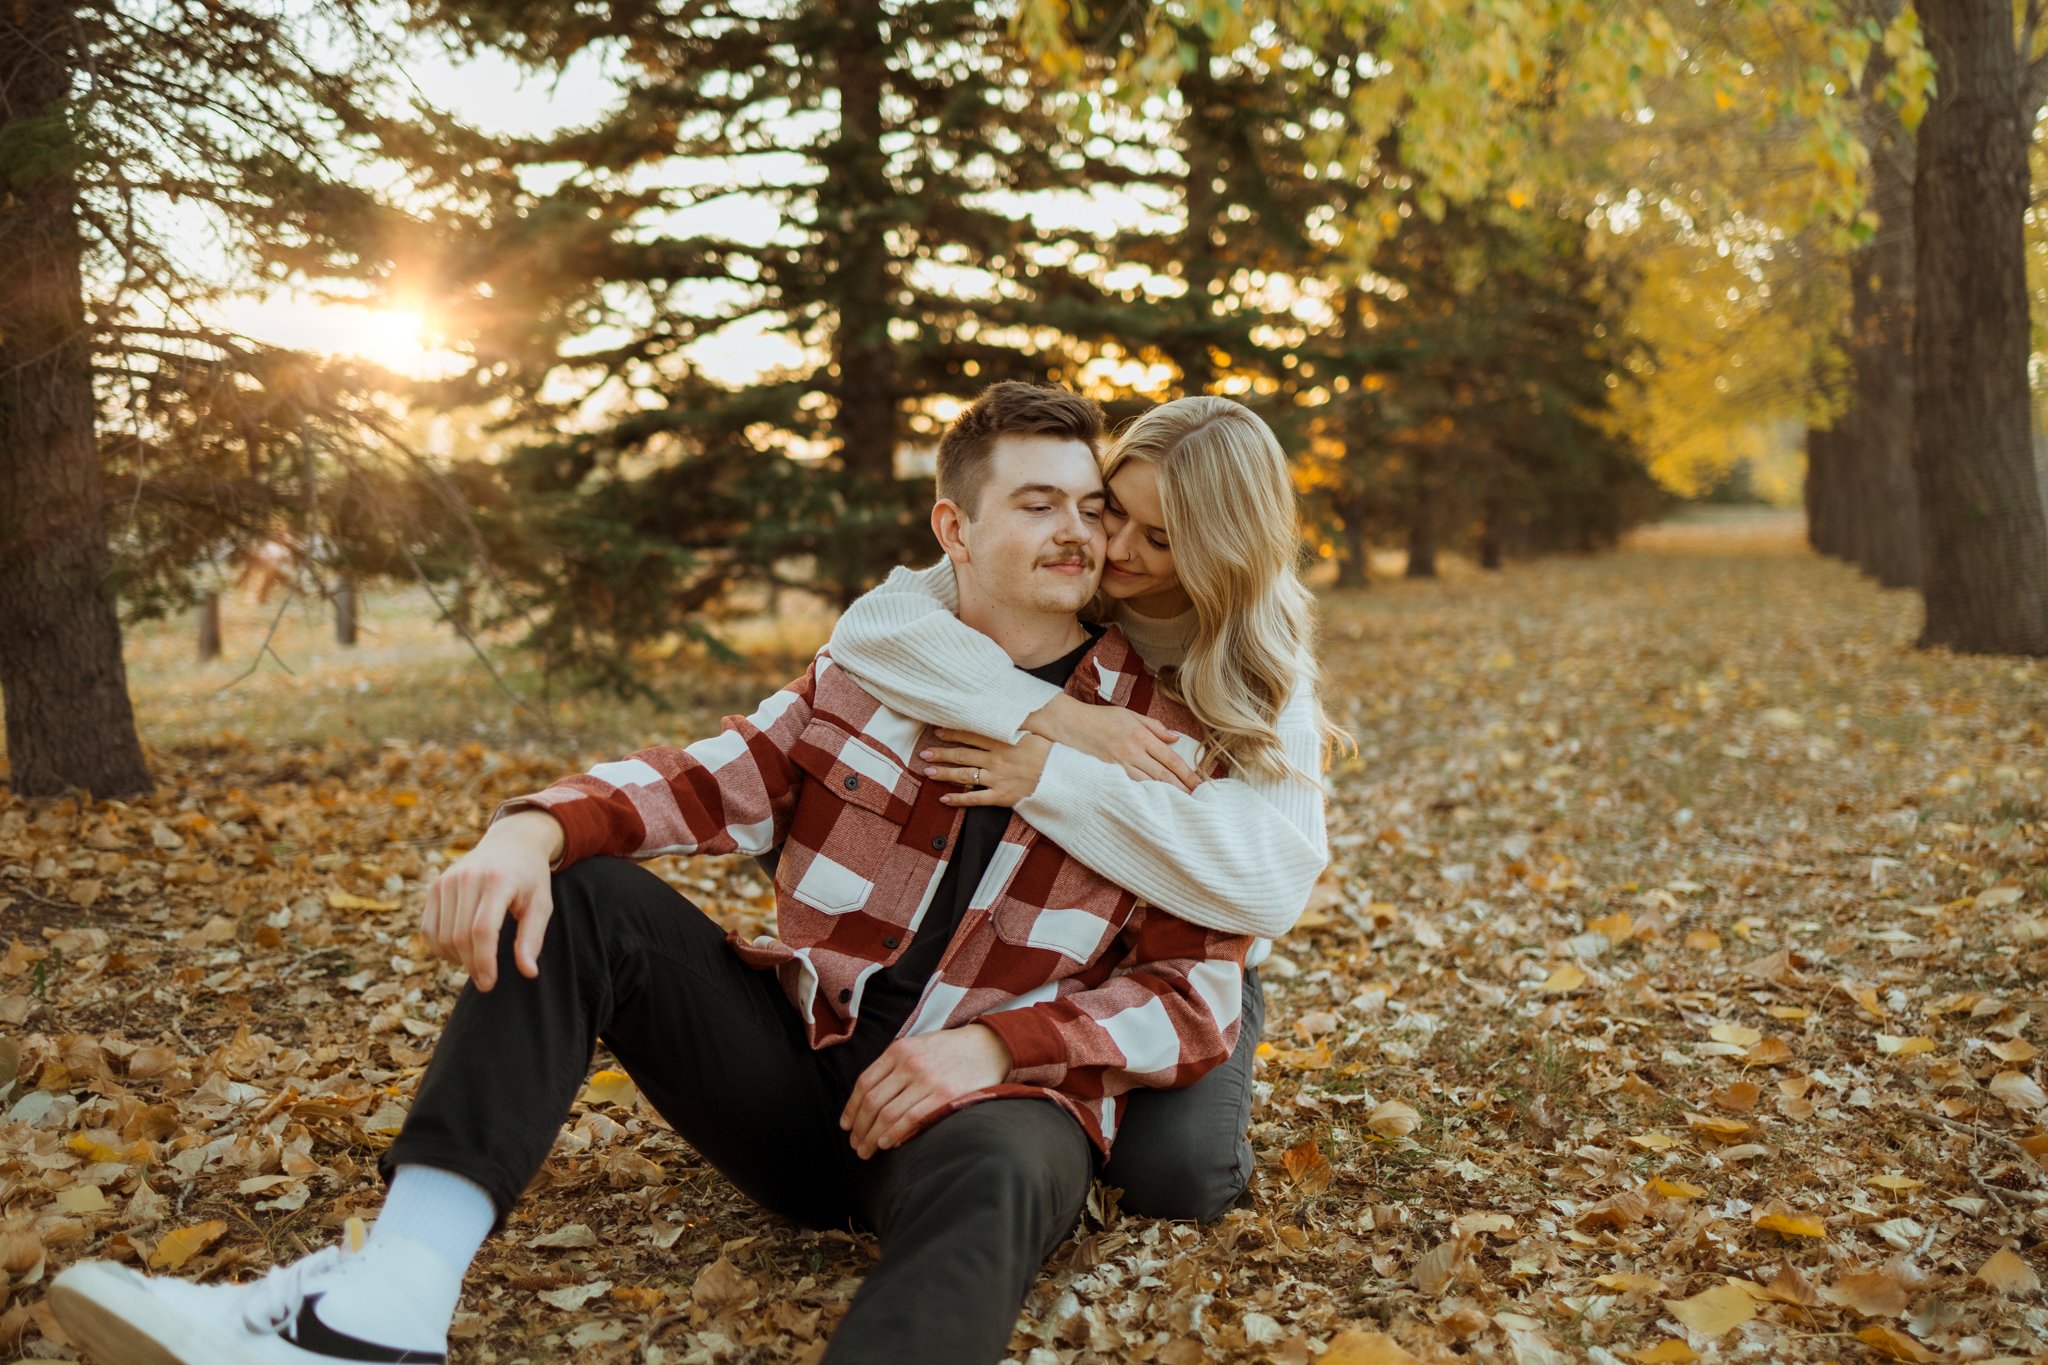 Calgary-wedding-photographer-love-and-be-loved-photography-Matthew-Kyra-Fish-Creek-Park-Fall-Engagement-Session-44.jpg